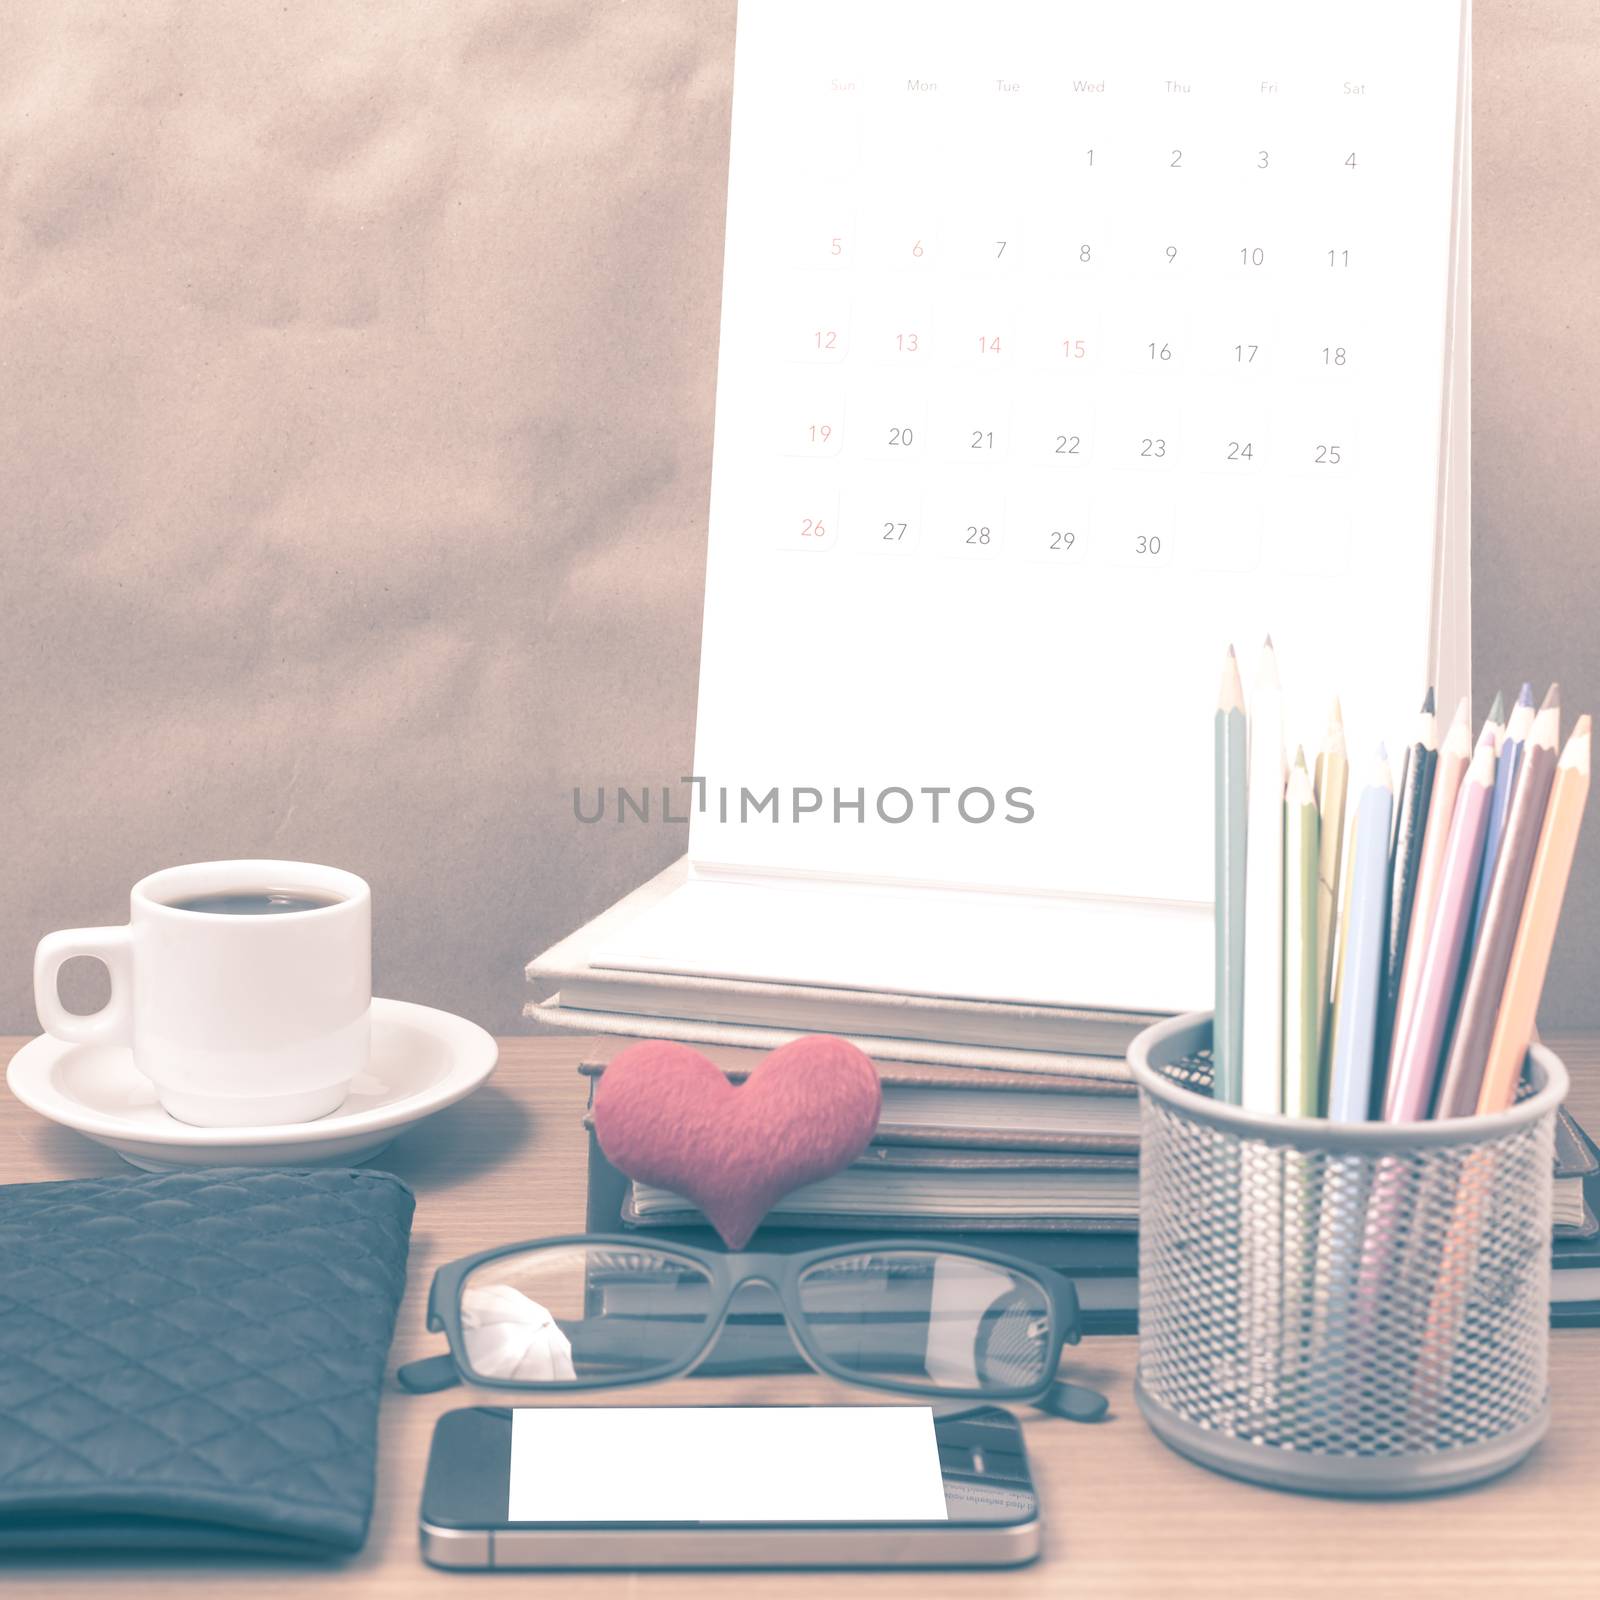 office desk : coffee with phone,wallet,calendar,color pencil box,stack of book,heart,eyeglasses on wood background vintage style